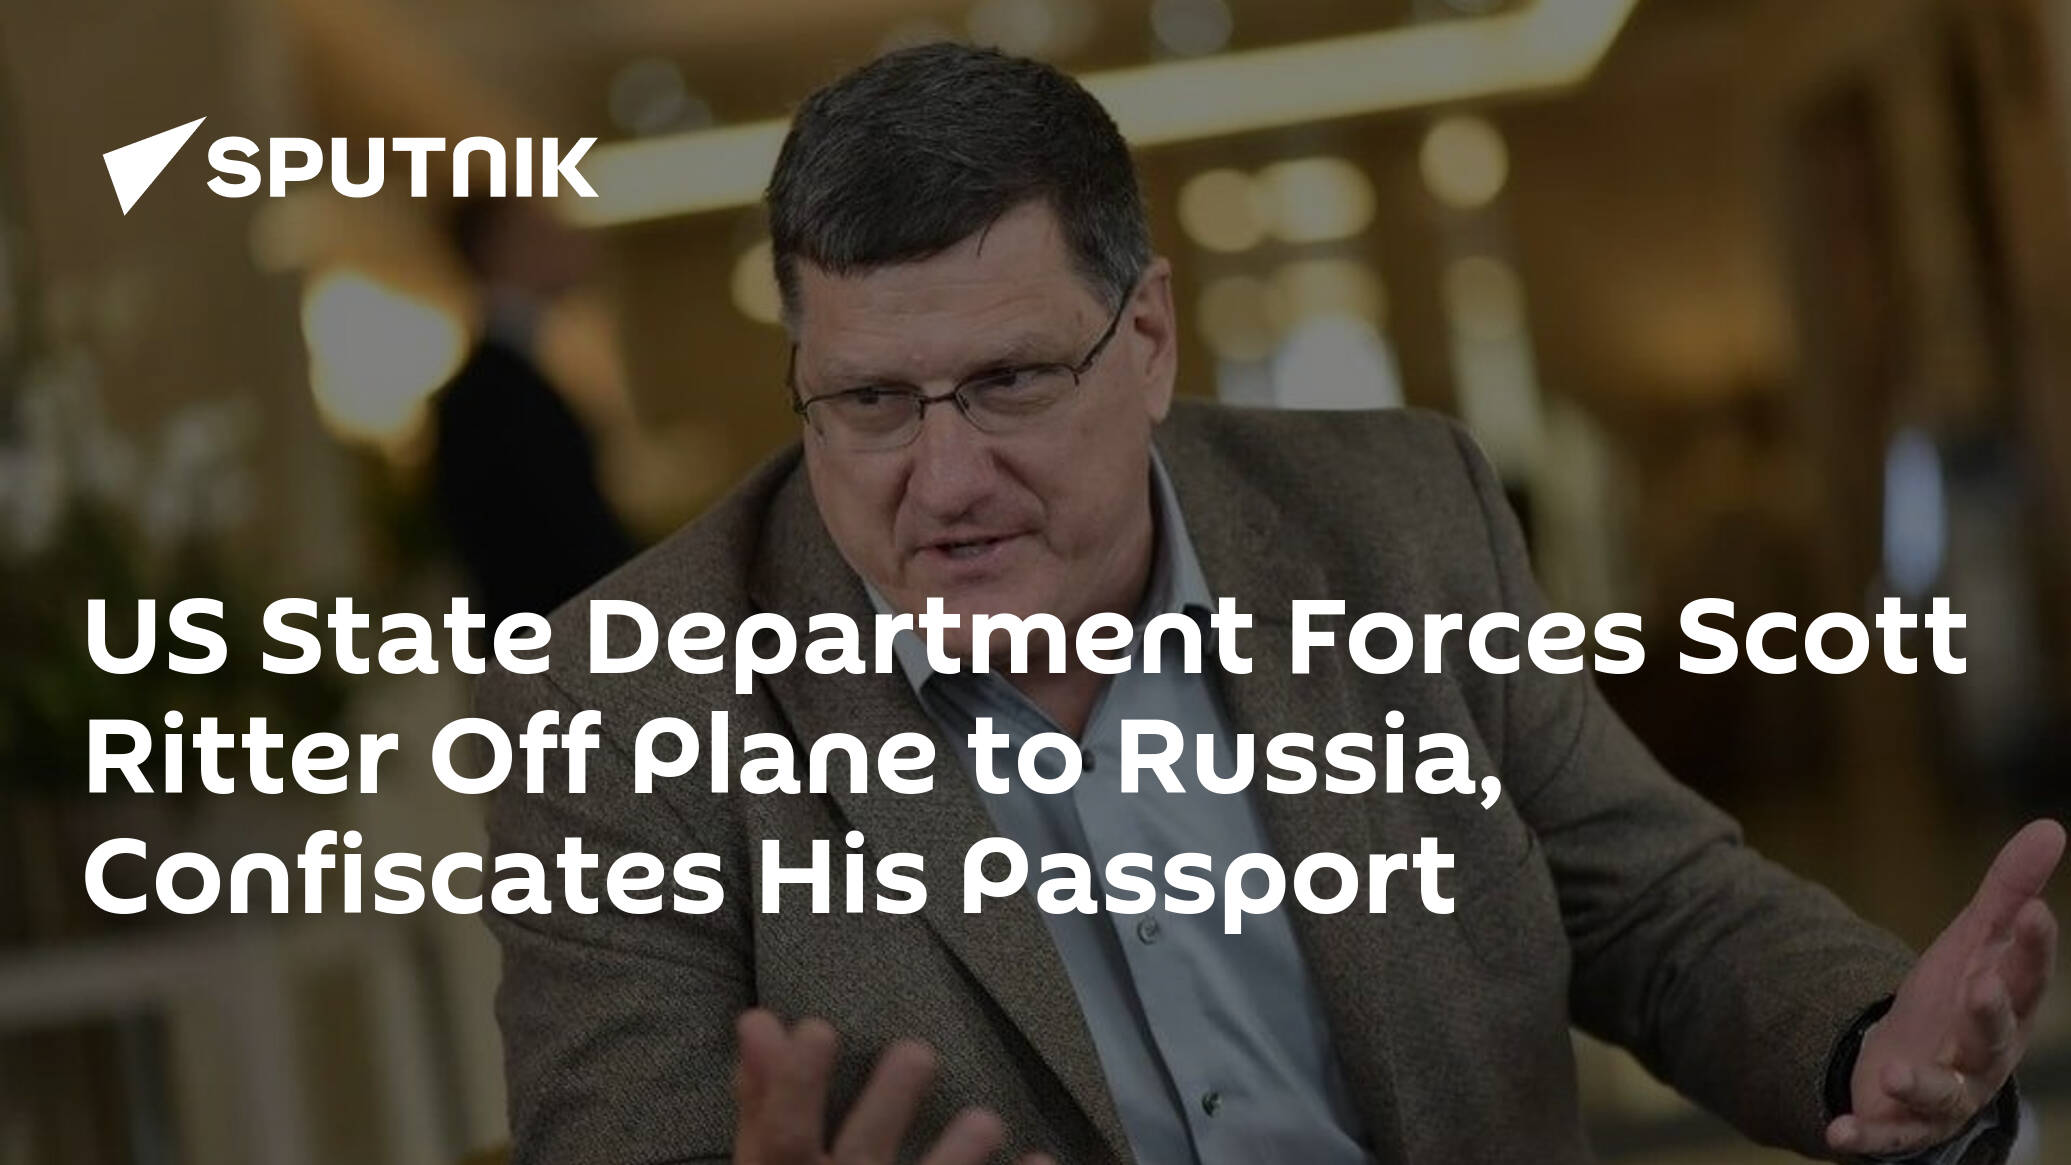 US State Department Forces Scott Ritter Off Plane to Russia, Confiscates His Passport